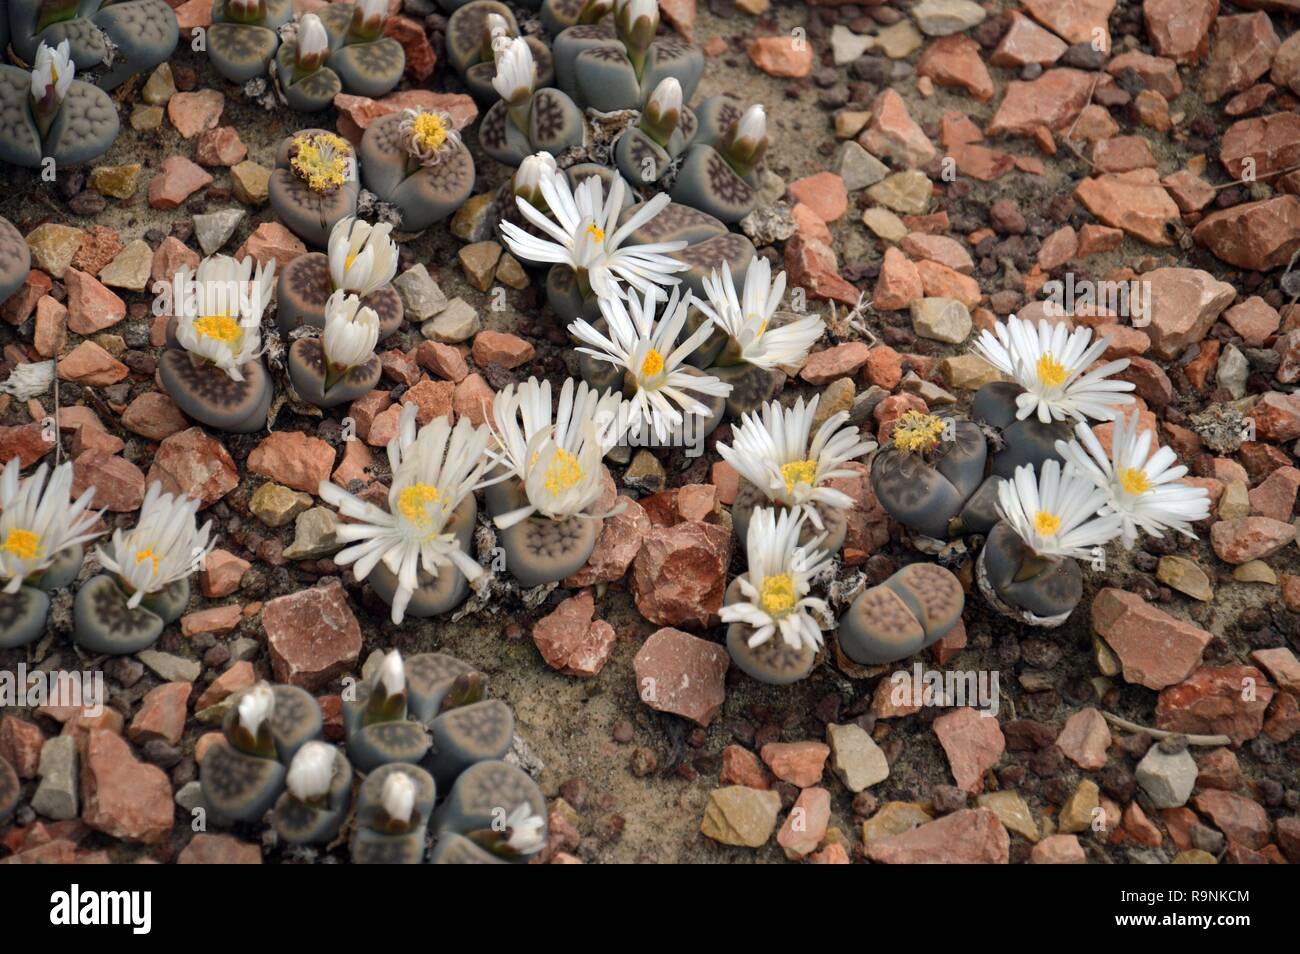 Peyote, a small spineless cactus with psychoactive alkaloids, particularly mescaline, from Mexico Stock Photo